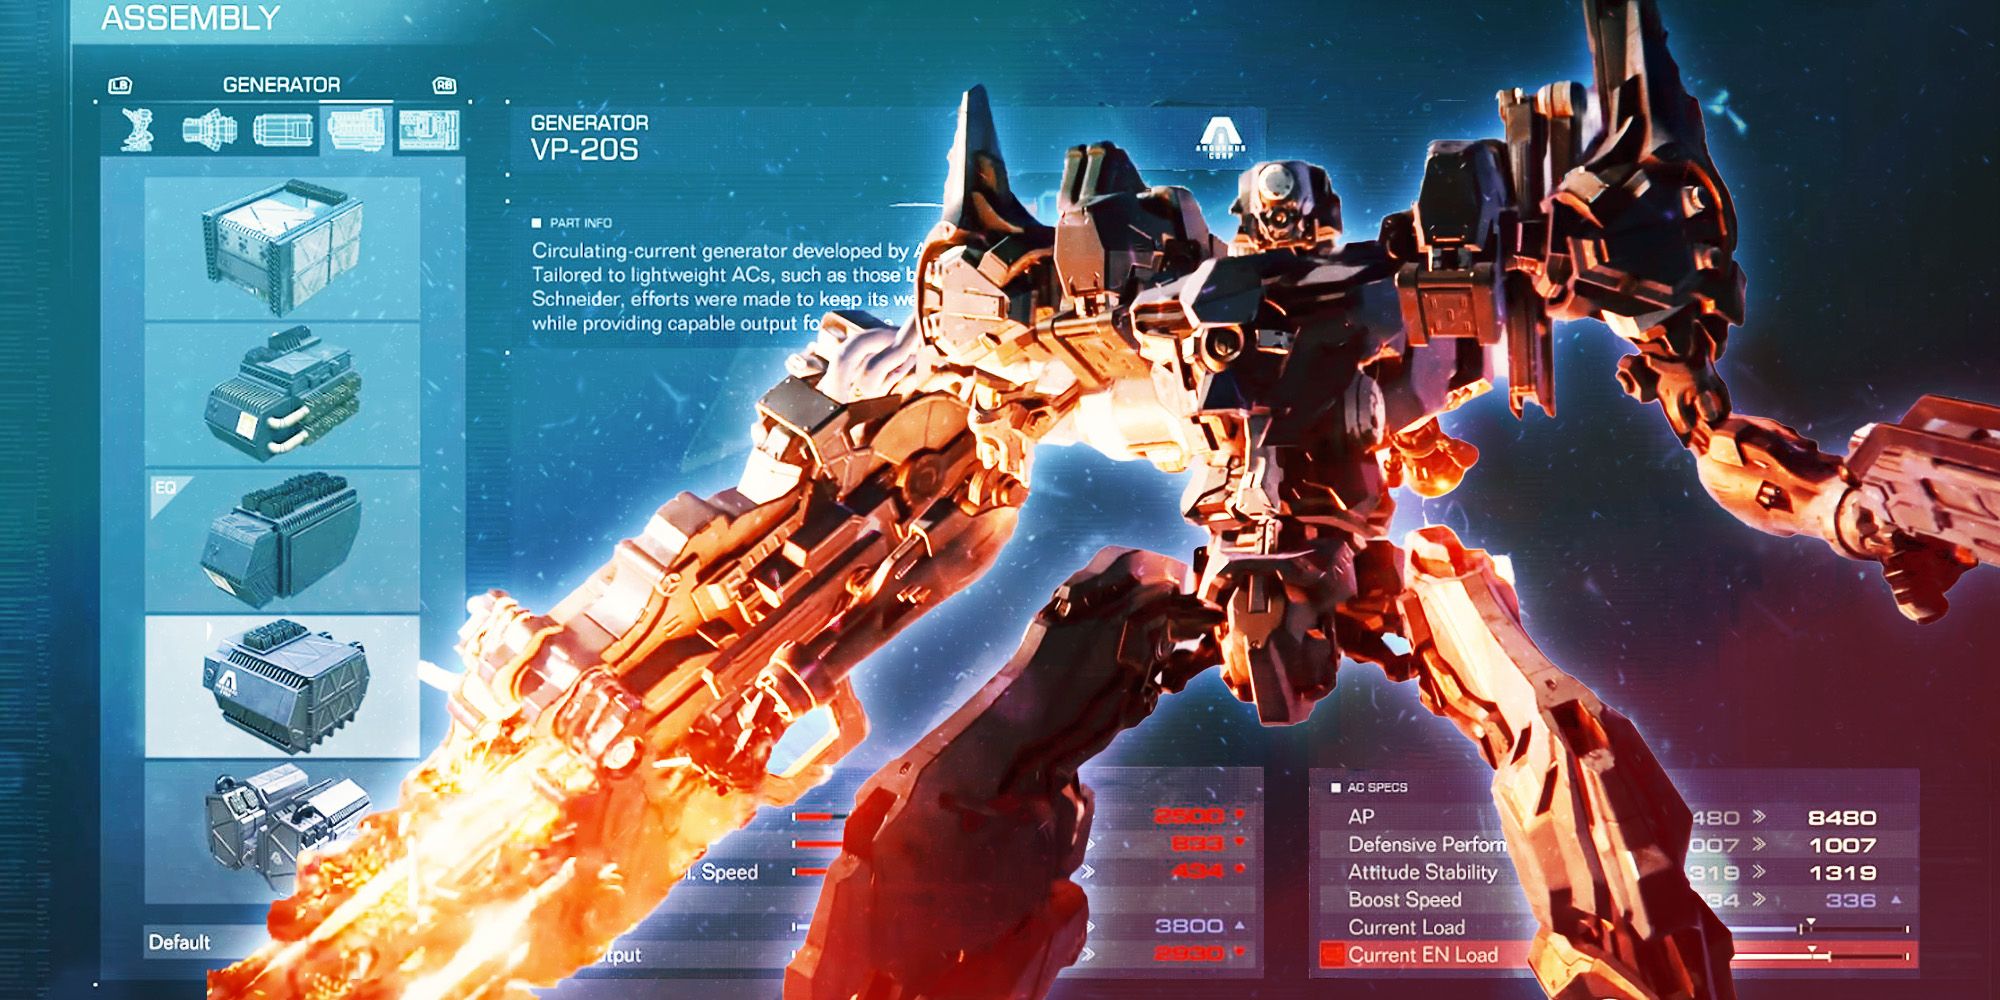 Armored Core 6 Strong First Mech Design Next to Assembly Internal Parts Menu Players can Find in the Garage